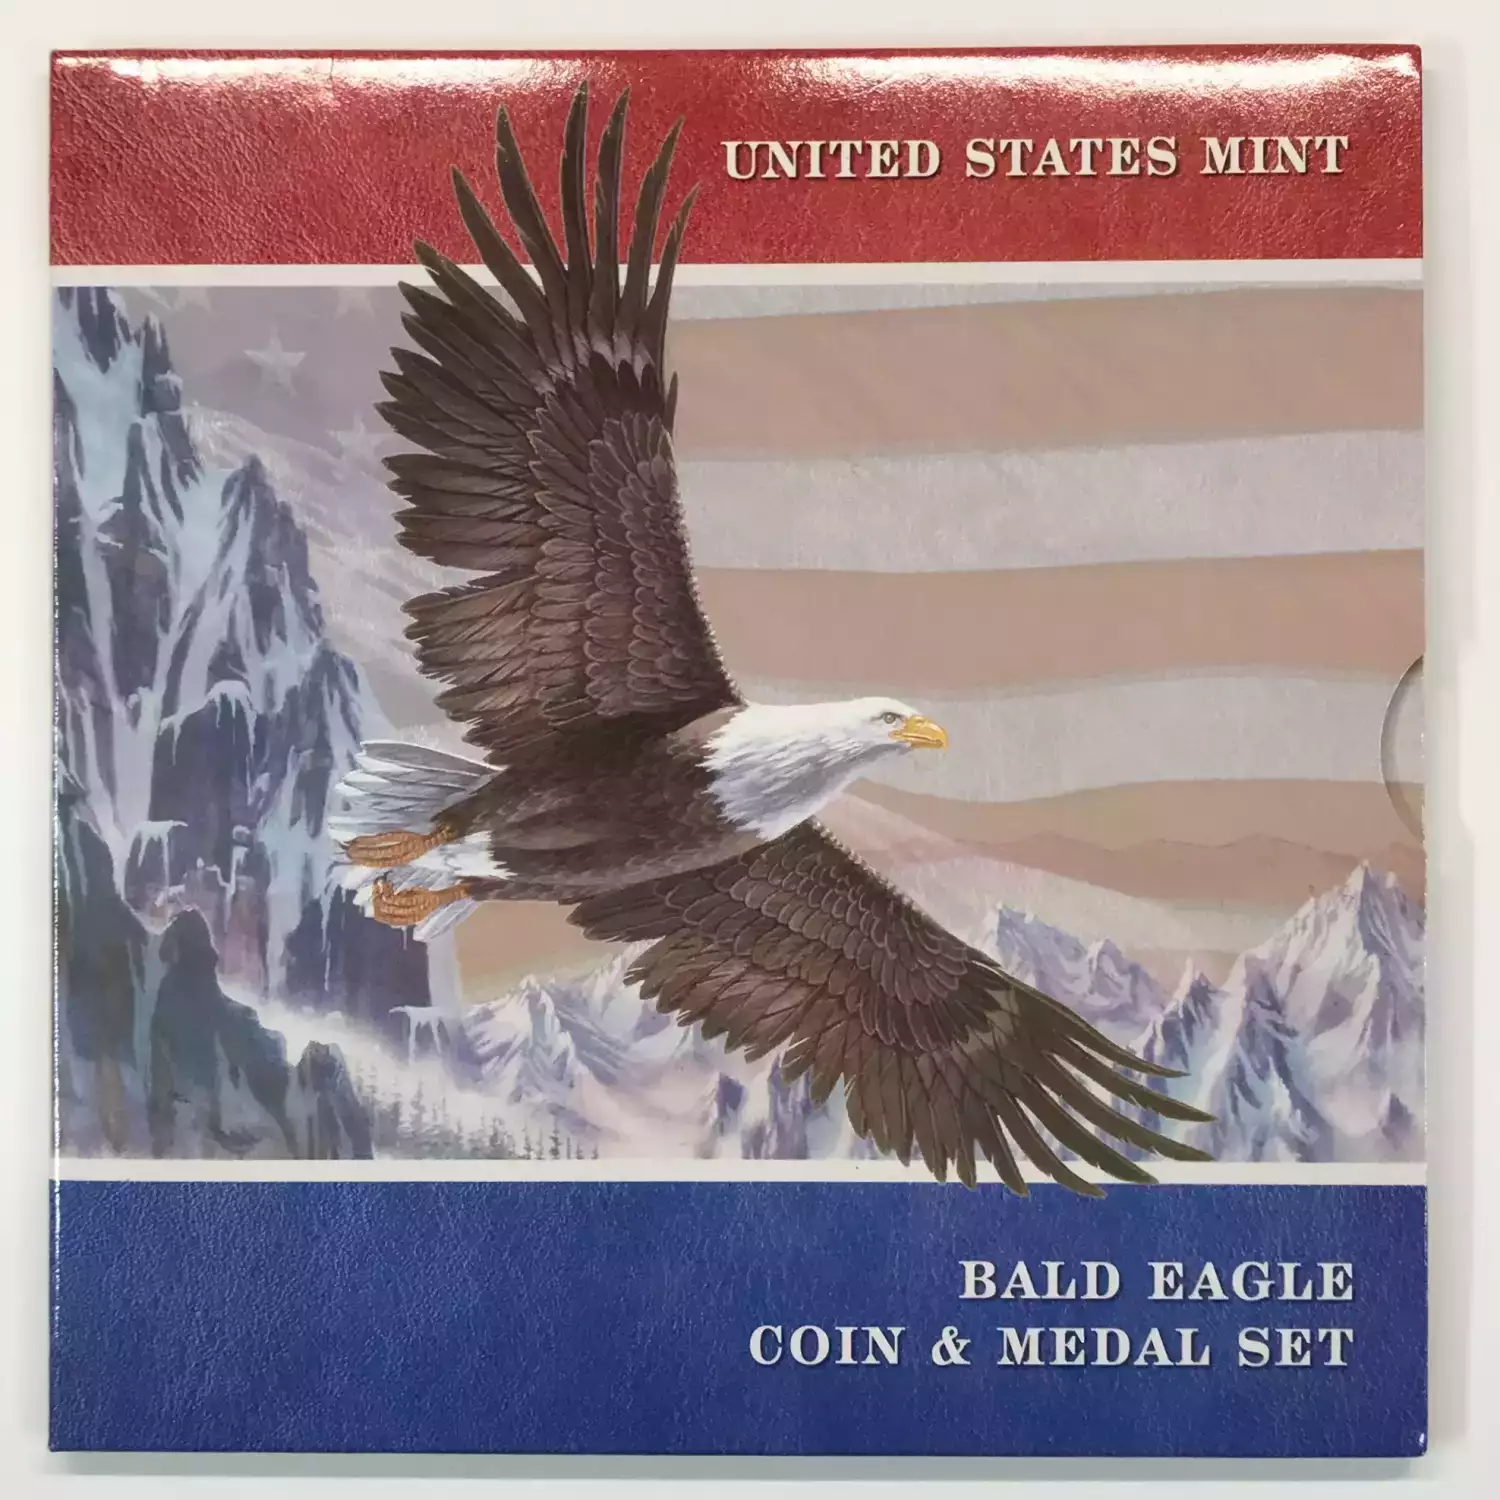 2008-P Bald Eagle Coin & Medal Set w US Mint OGP - Uncirculated Silver Dollar  (3)